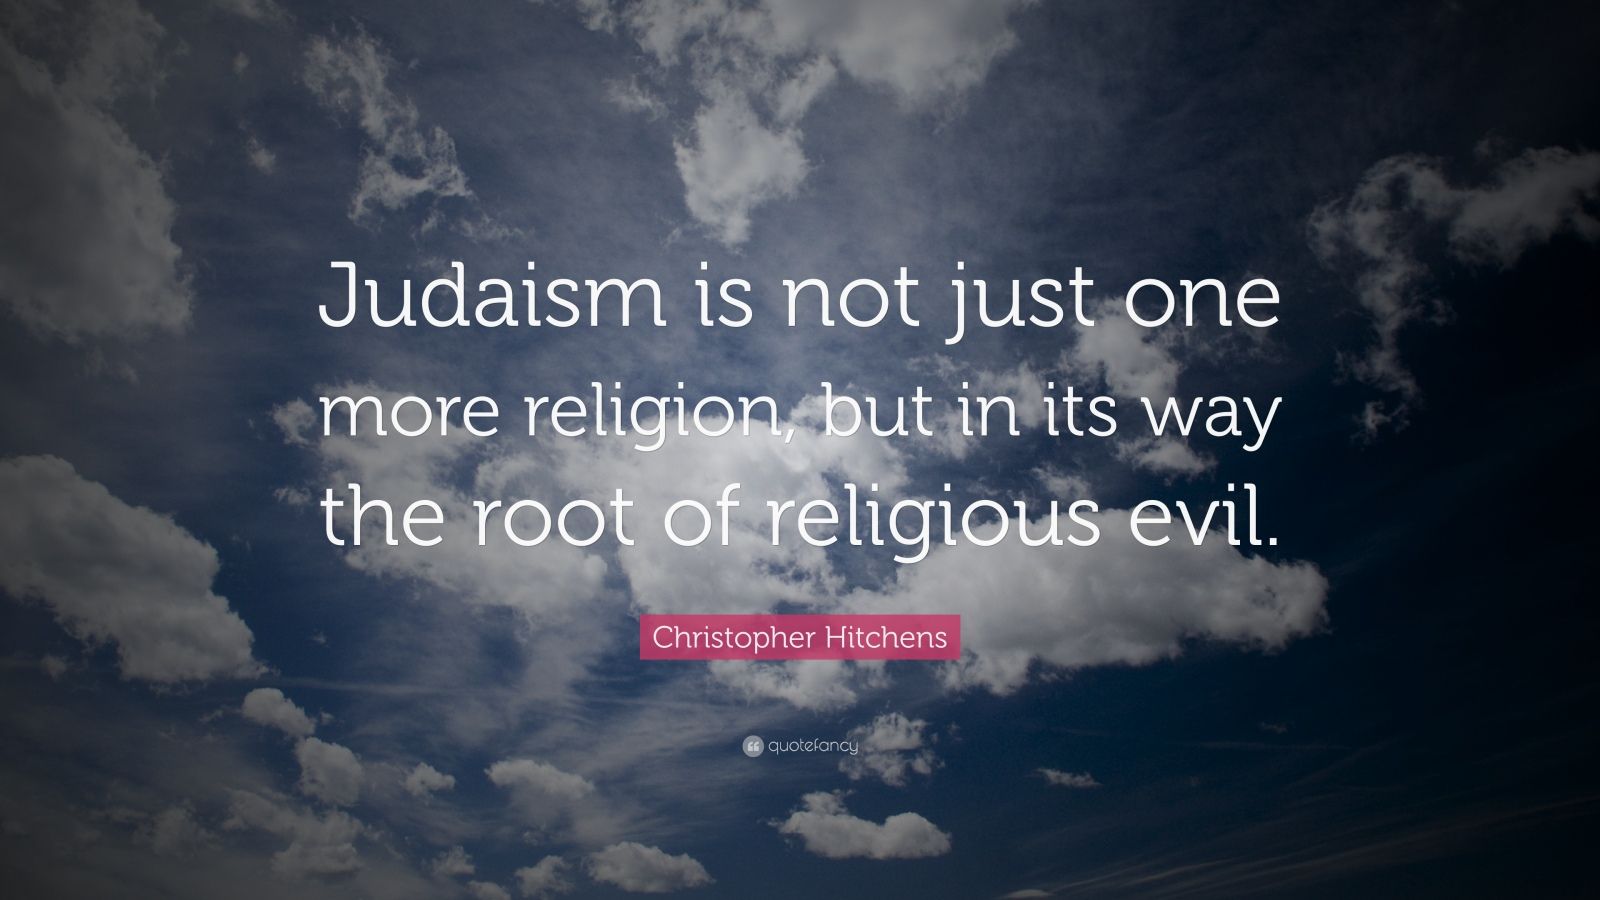 Christopher Hitchens Quote: “Judaism is not just one more religion, but ...